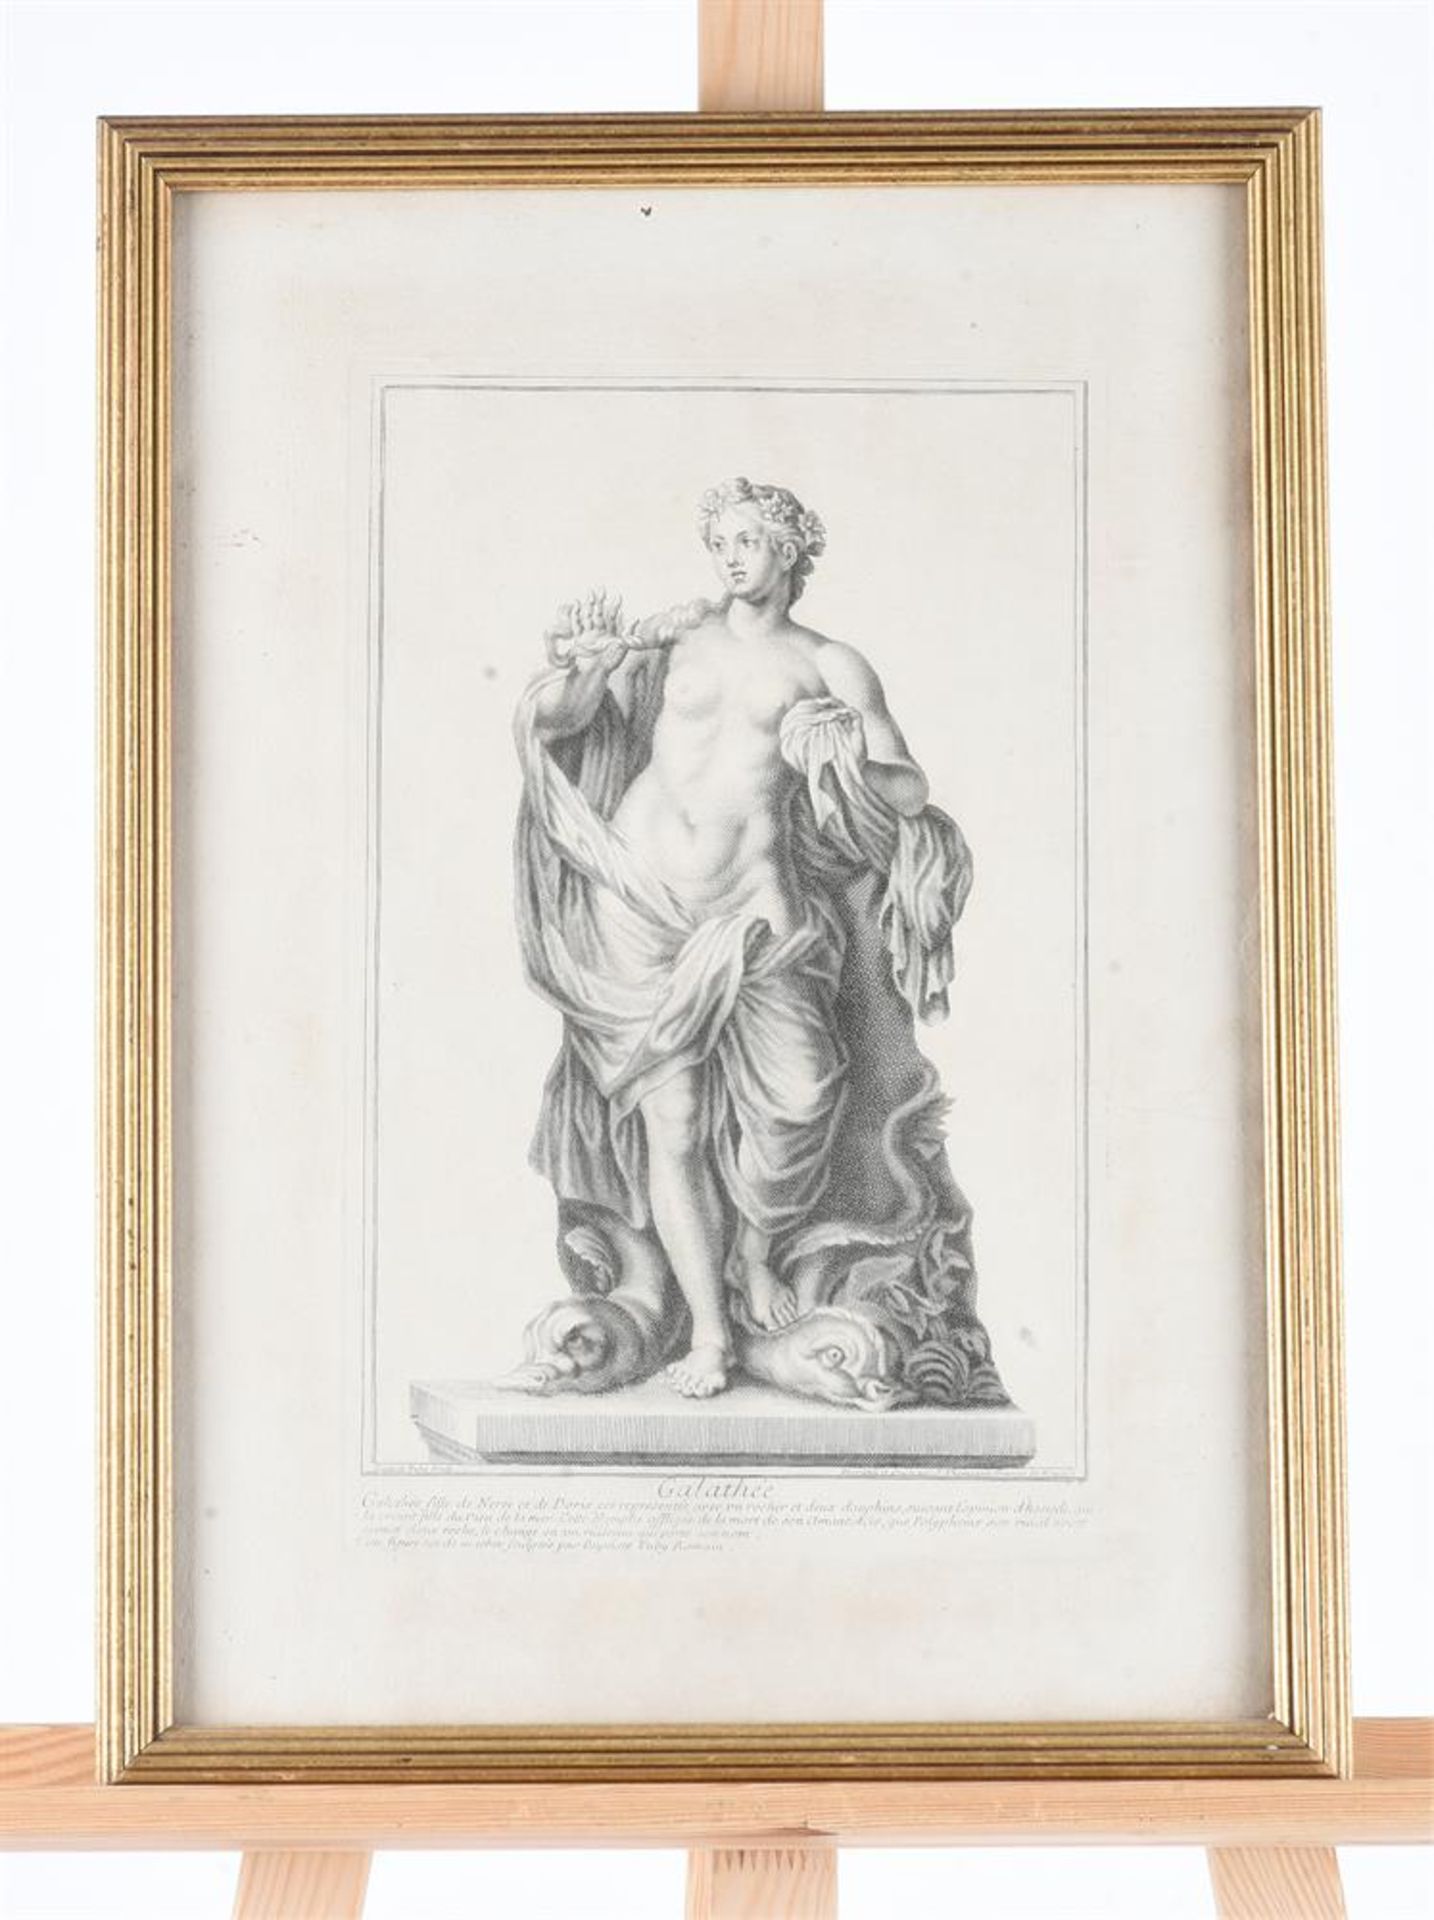 A SET OF TEN 17-18TH CENTURY ENGRAVINGS OF CLASSICAL AND RENAISSANCE STATUARY - Image 9 of 11